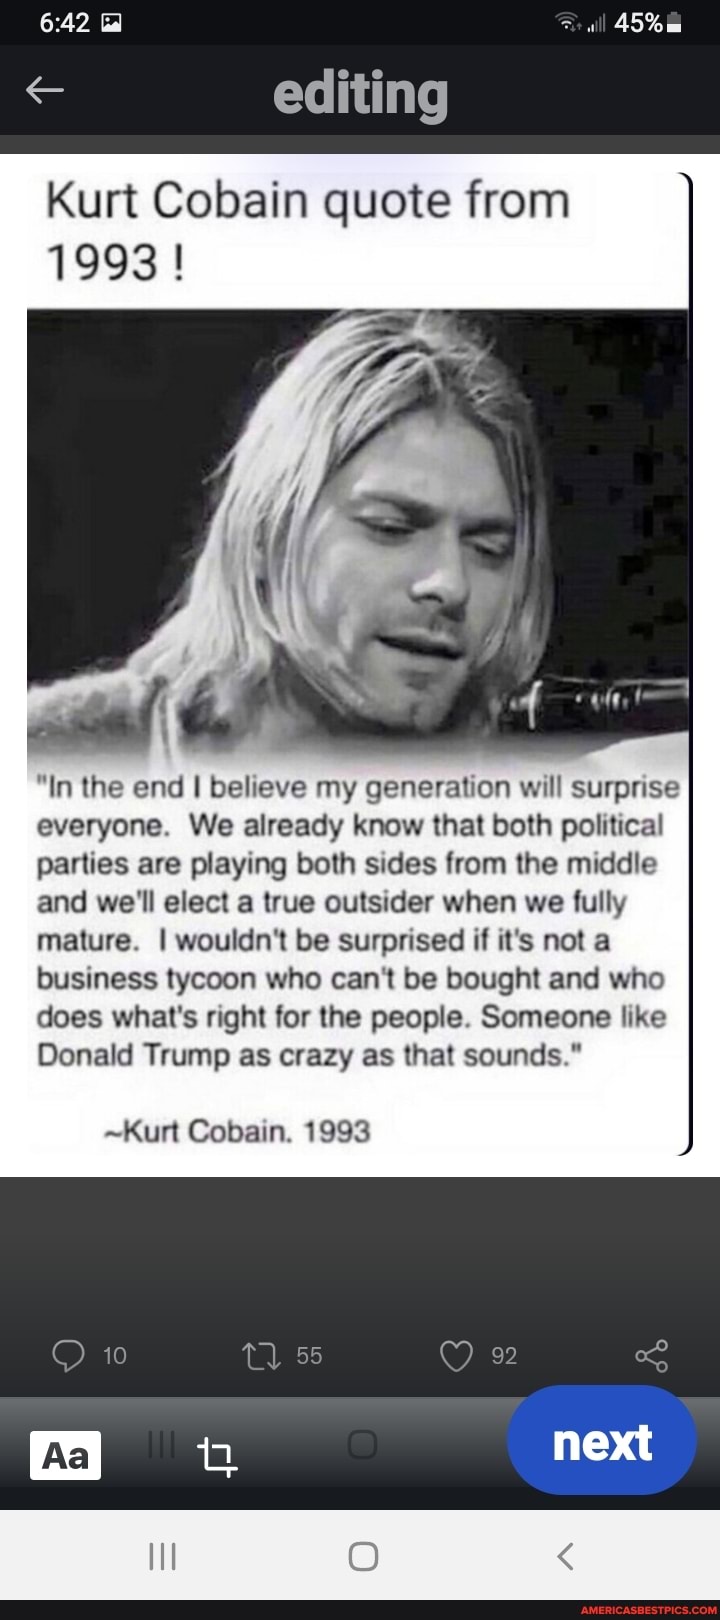 Gd editing Kurt Cobain quote from 1993! 